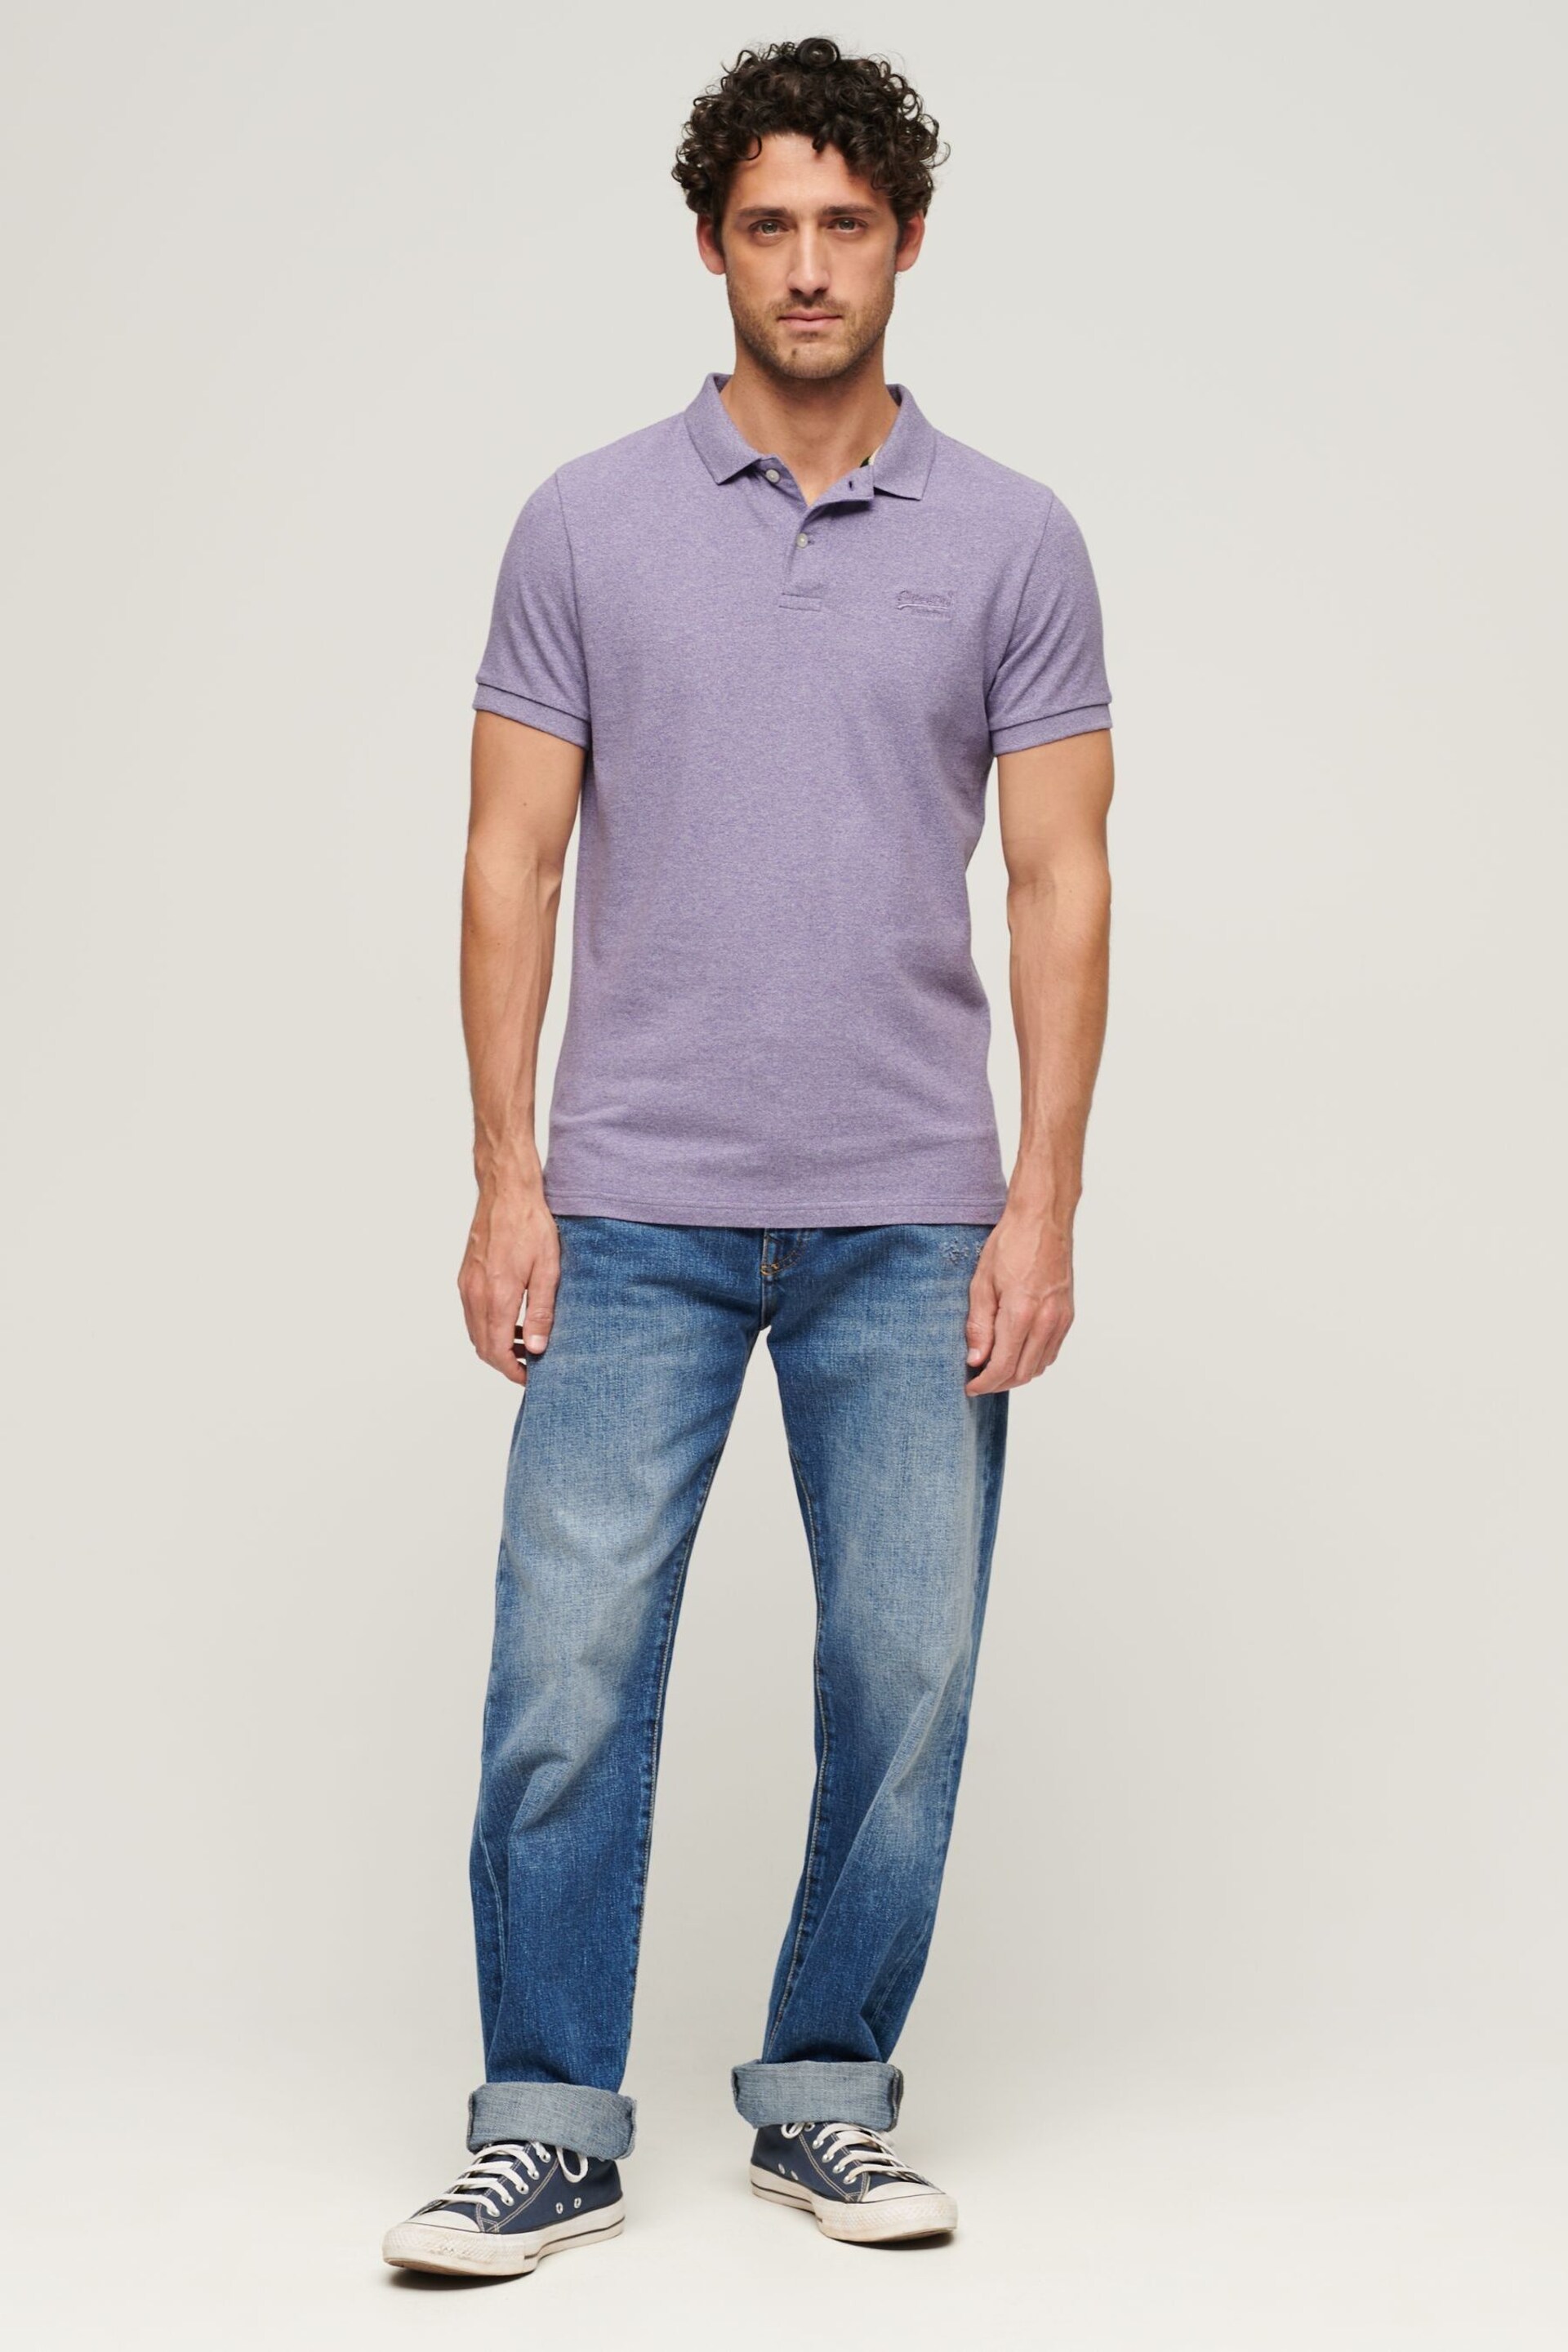 Superdry Purple Classic Pique Polo Shirt - Image 2 of 3